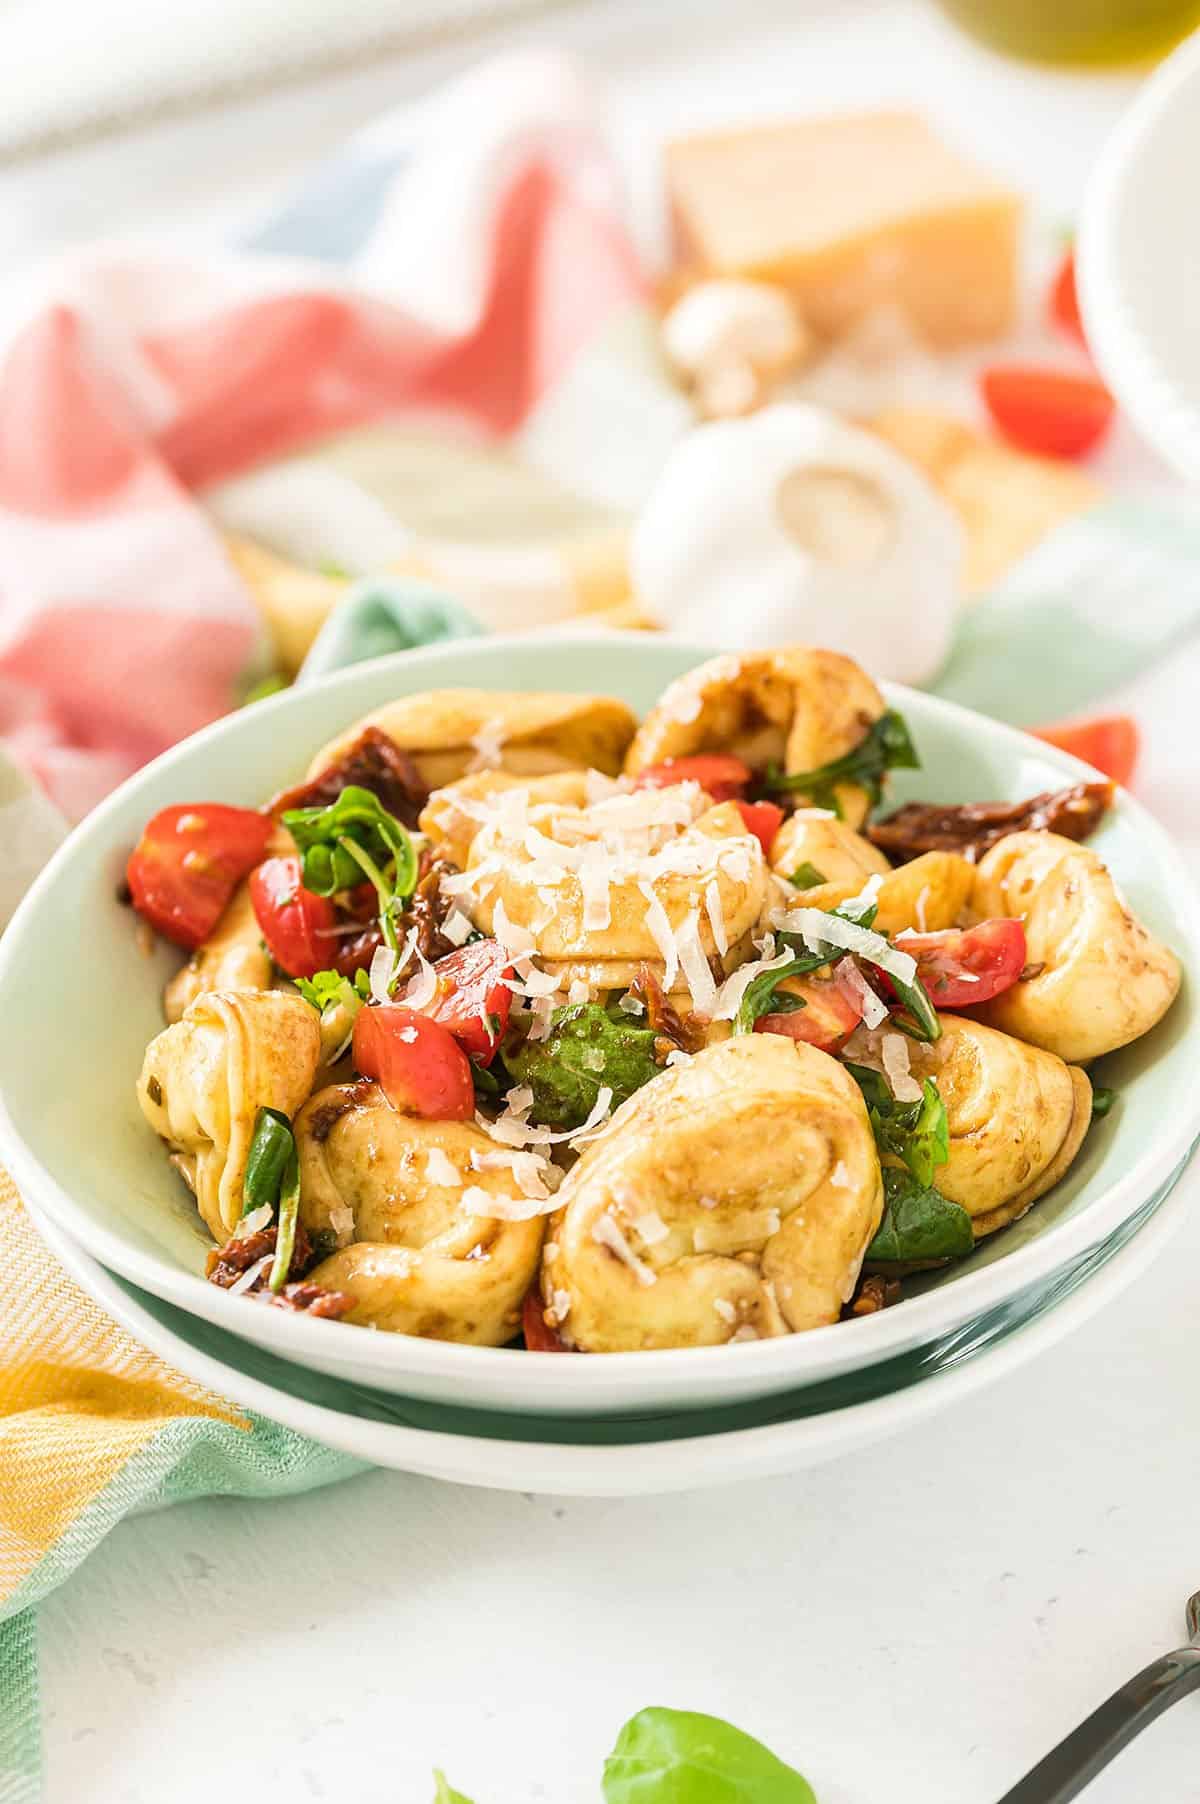 cold tortellini salad in small blue bowl.